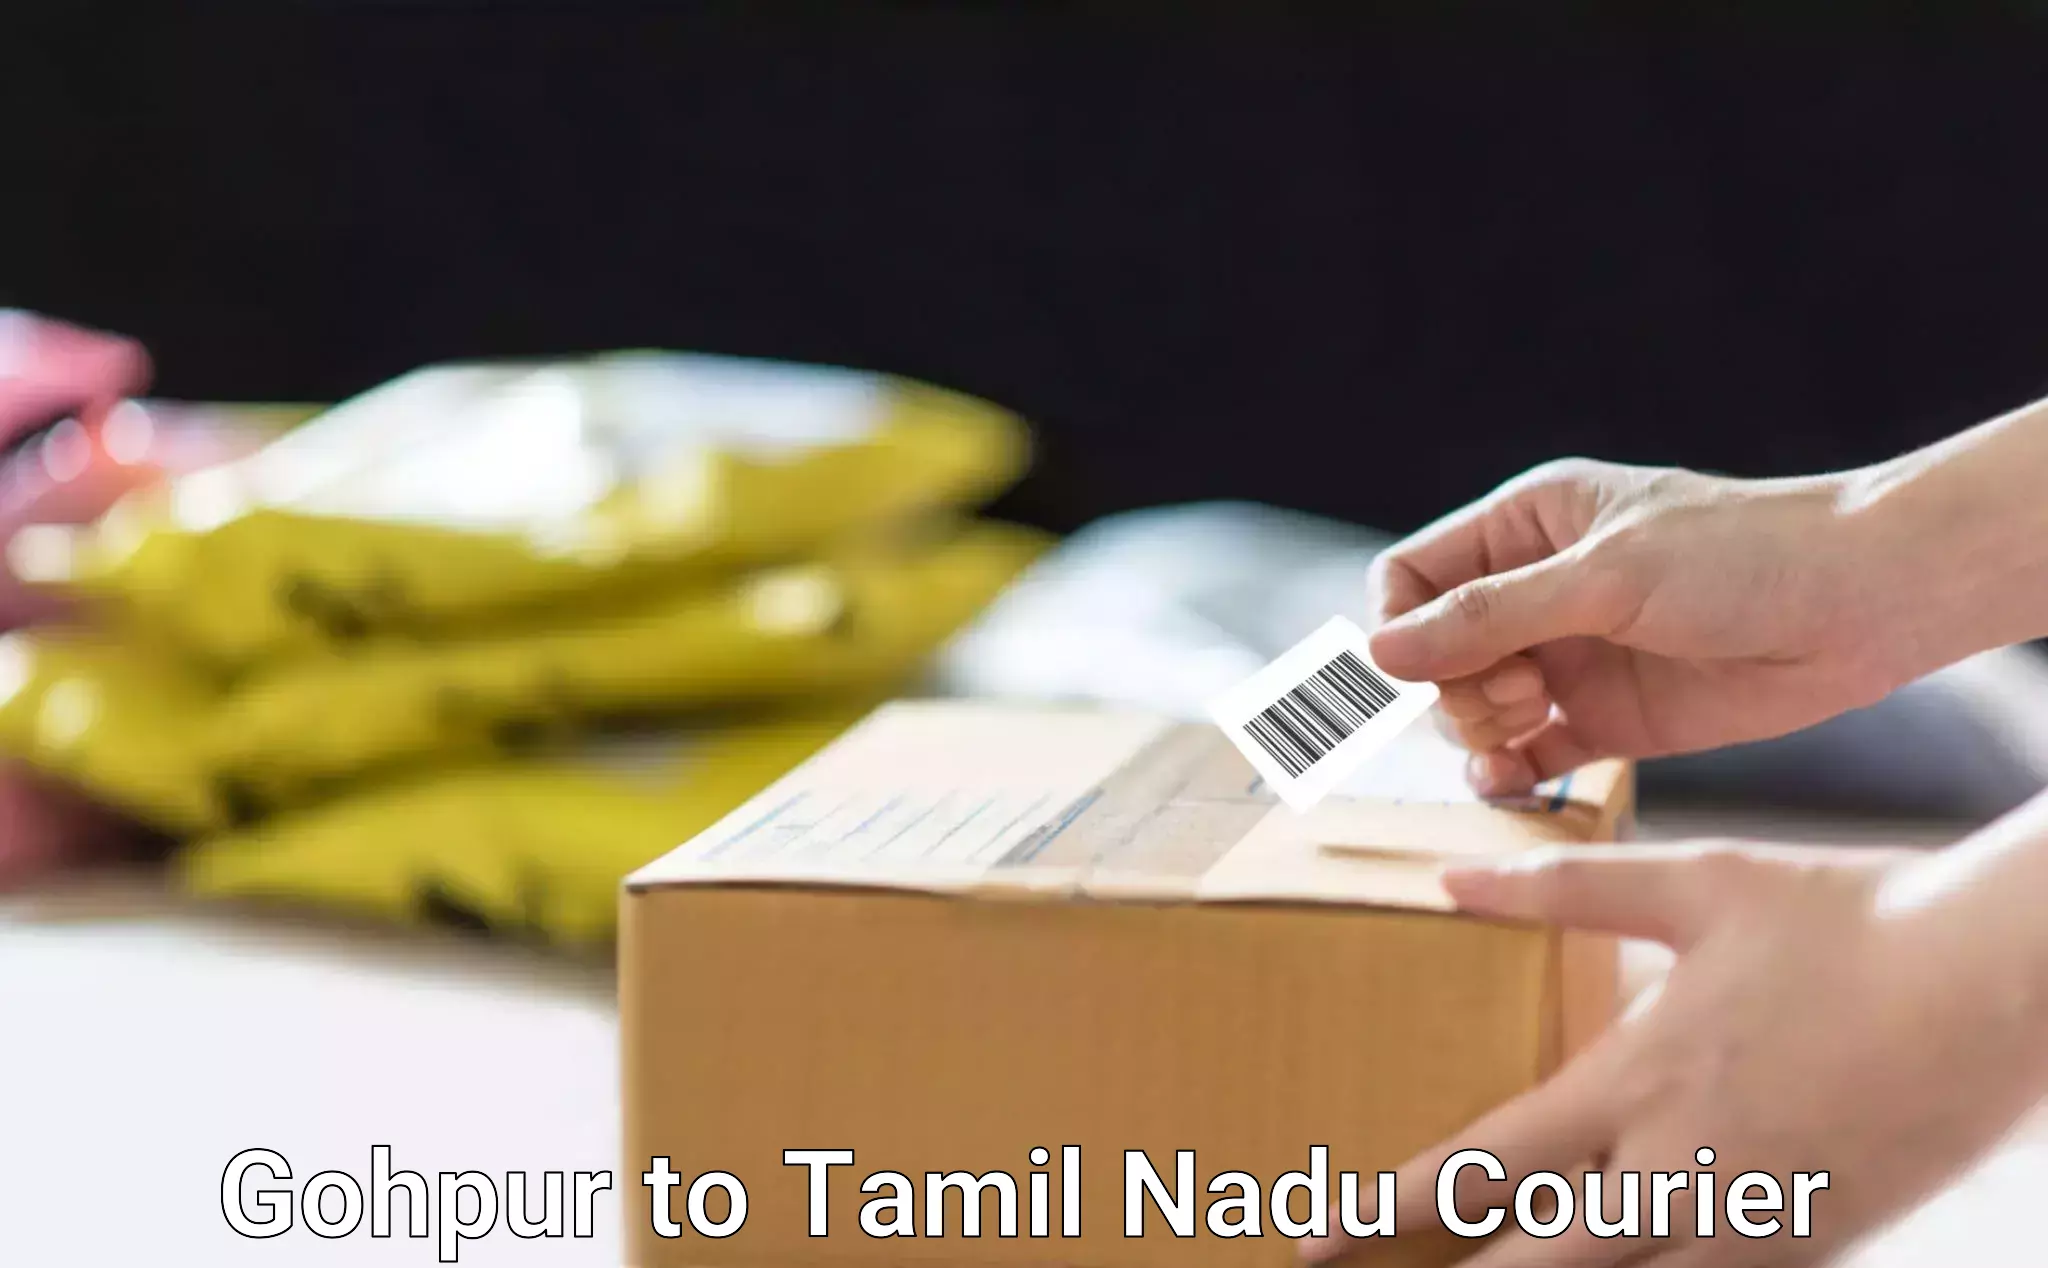 Streamlined delivery processes Gohpur to Tamil Nadu